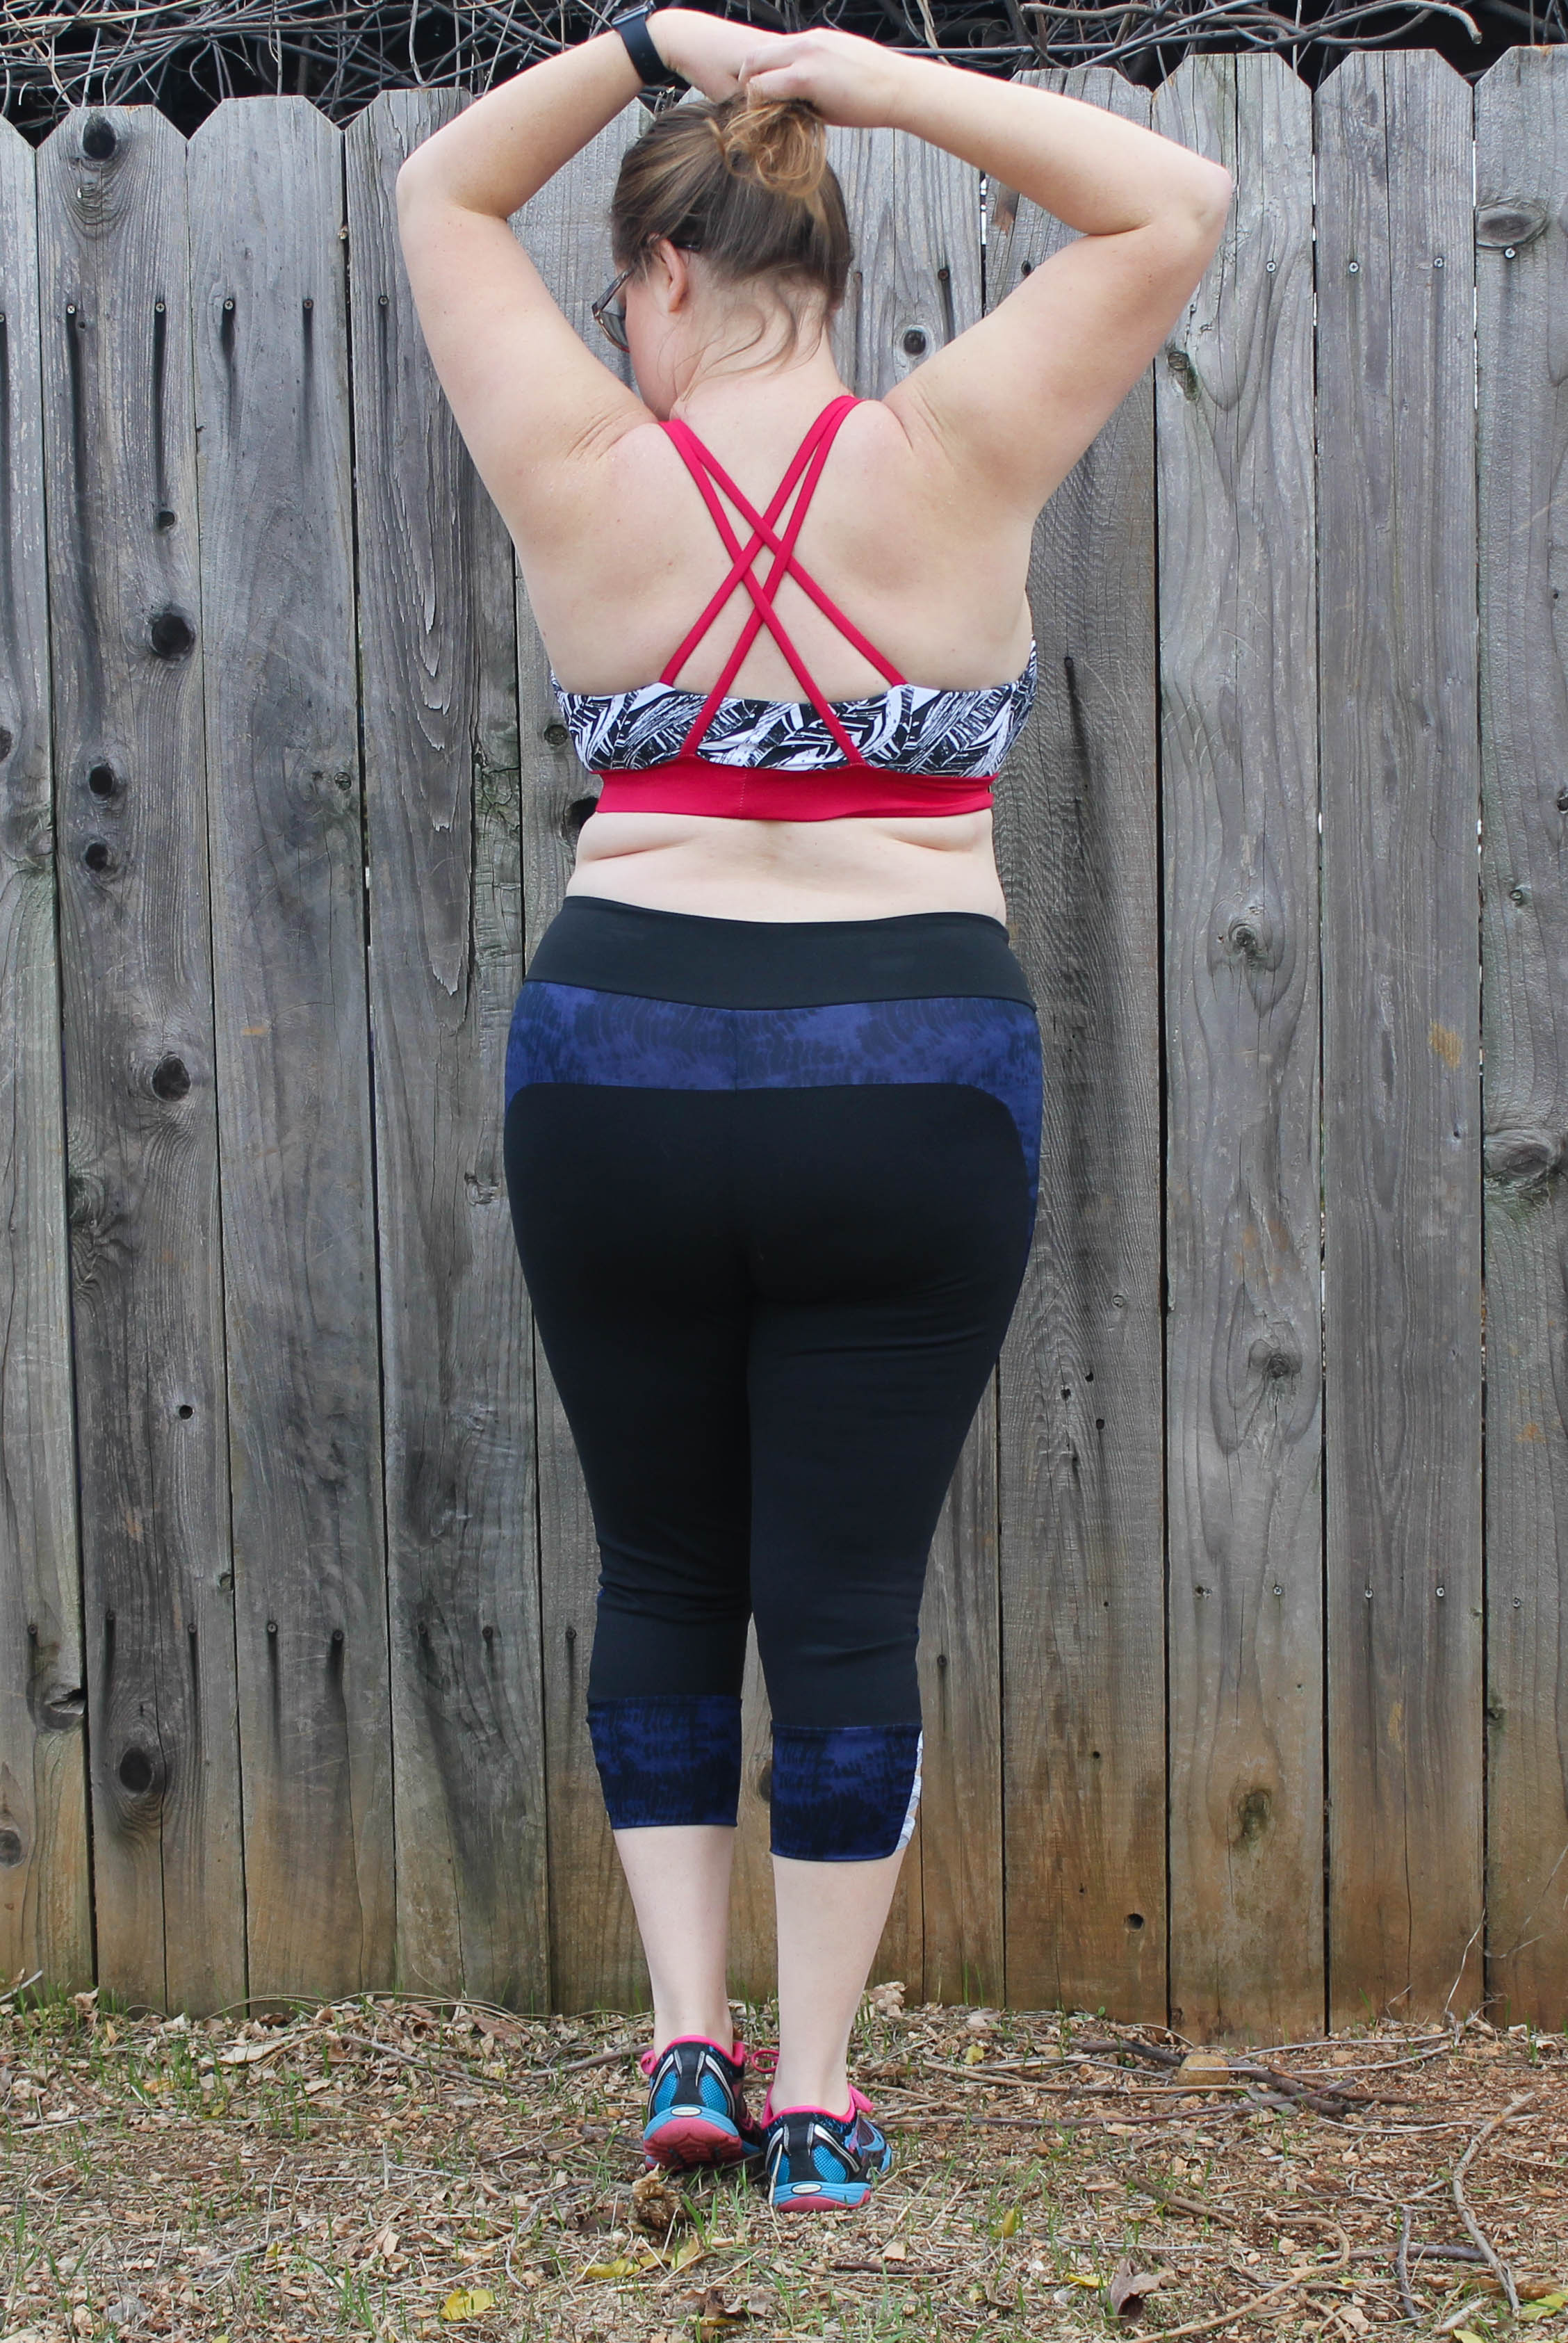 New activewear: The Power Sports Bra from Greenstyle Creations